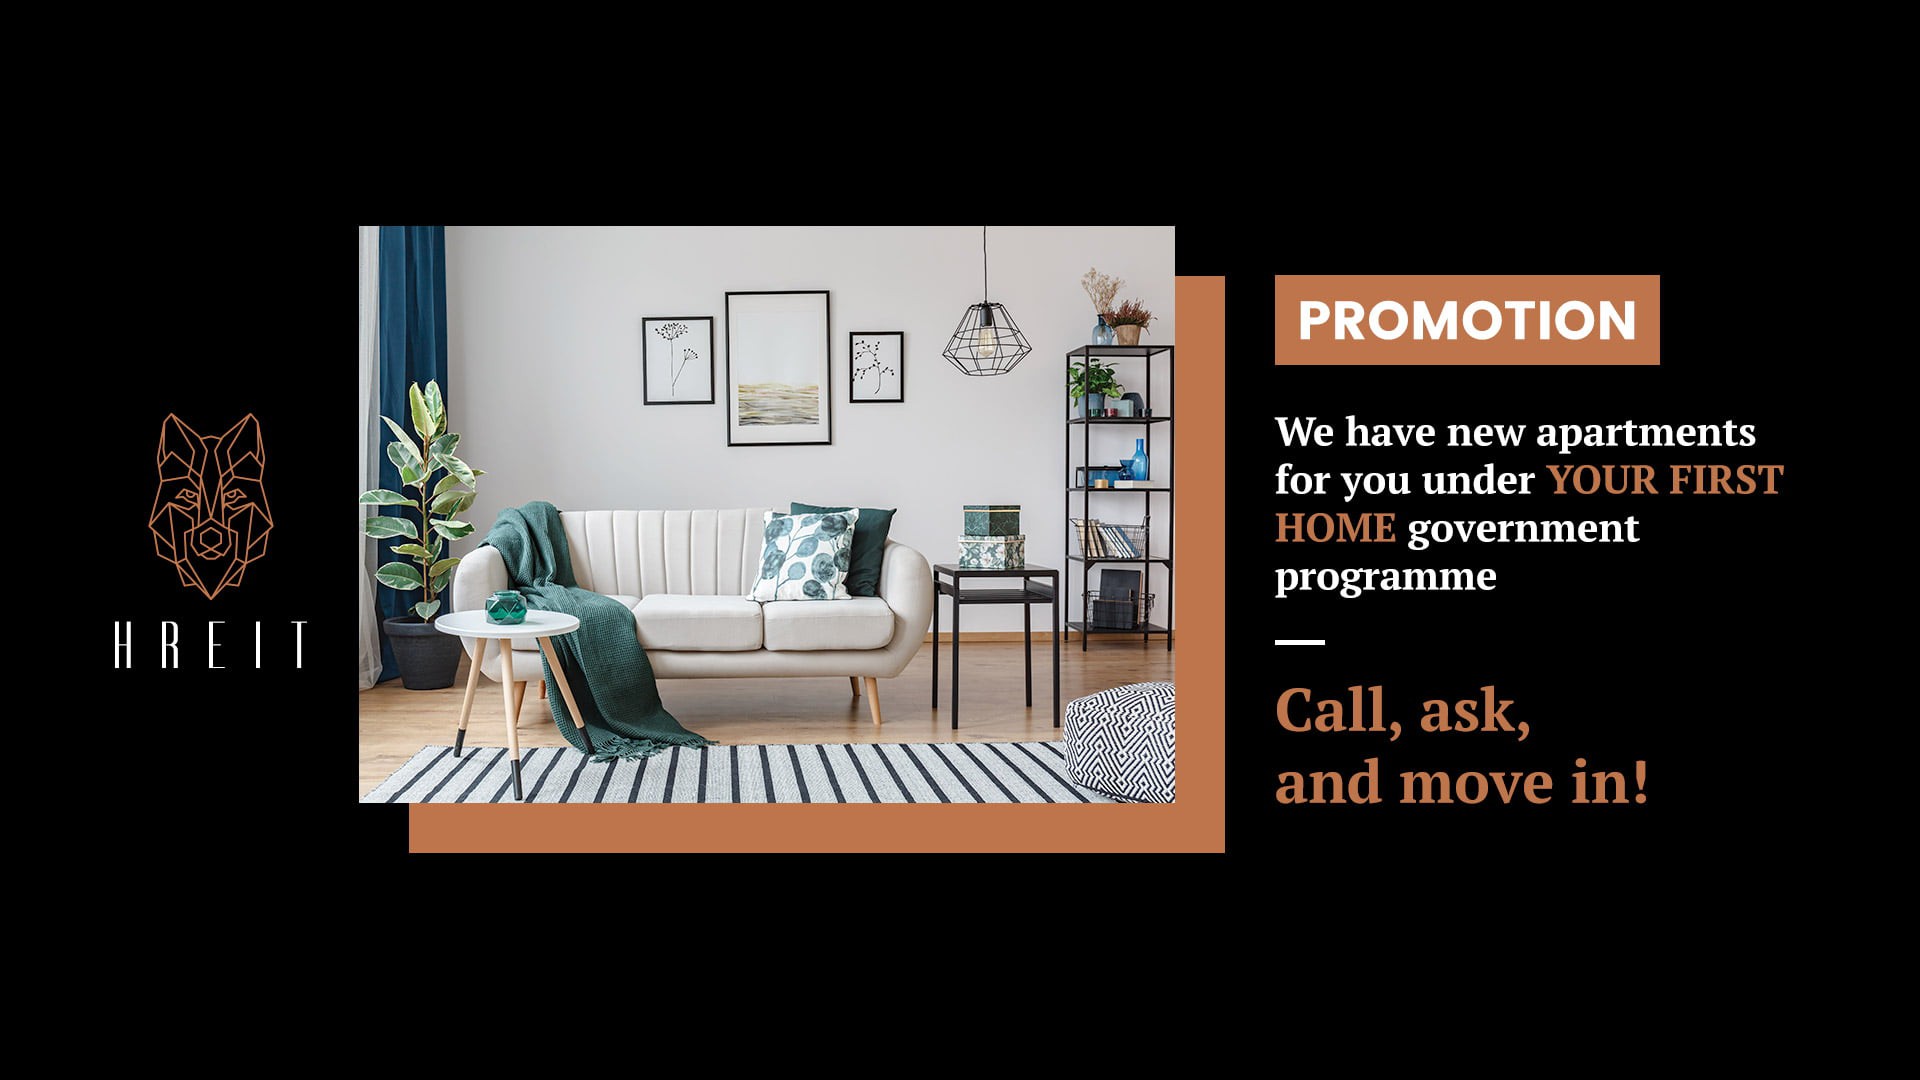 We have new apartments for you under YOUR FIRST HOME government programme